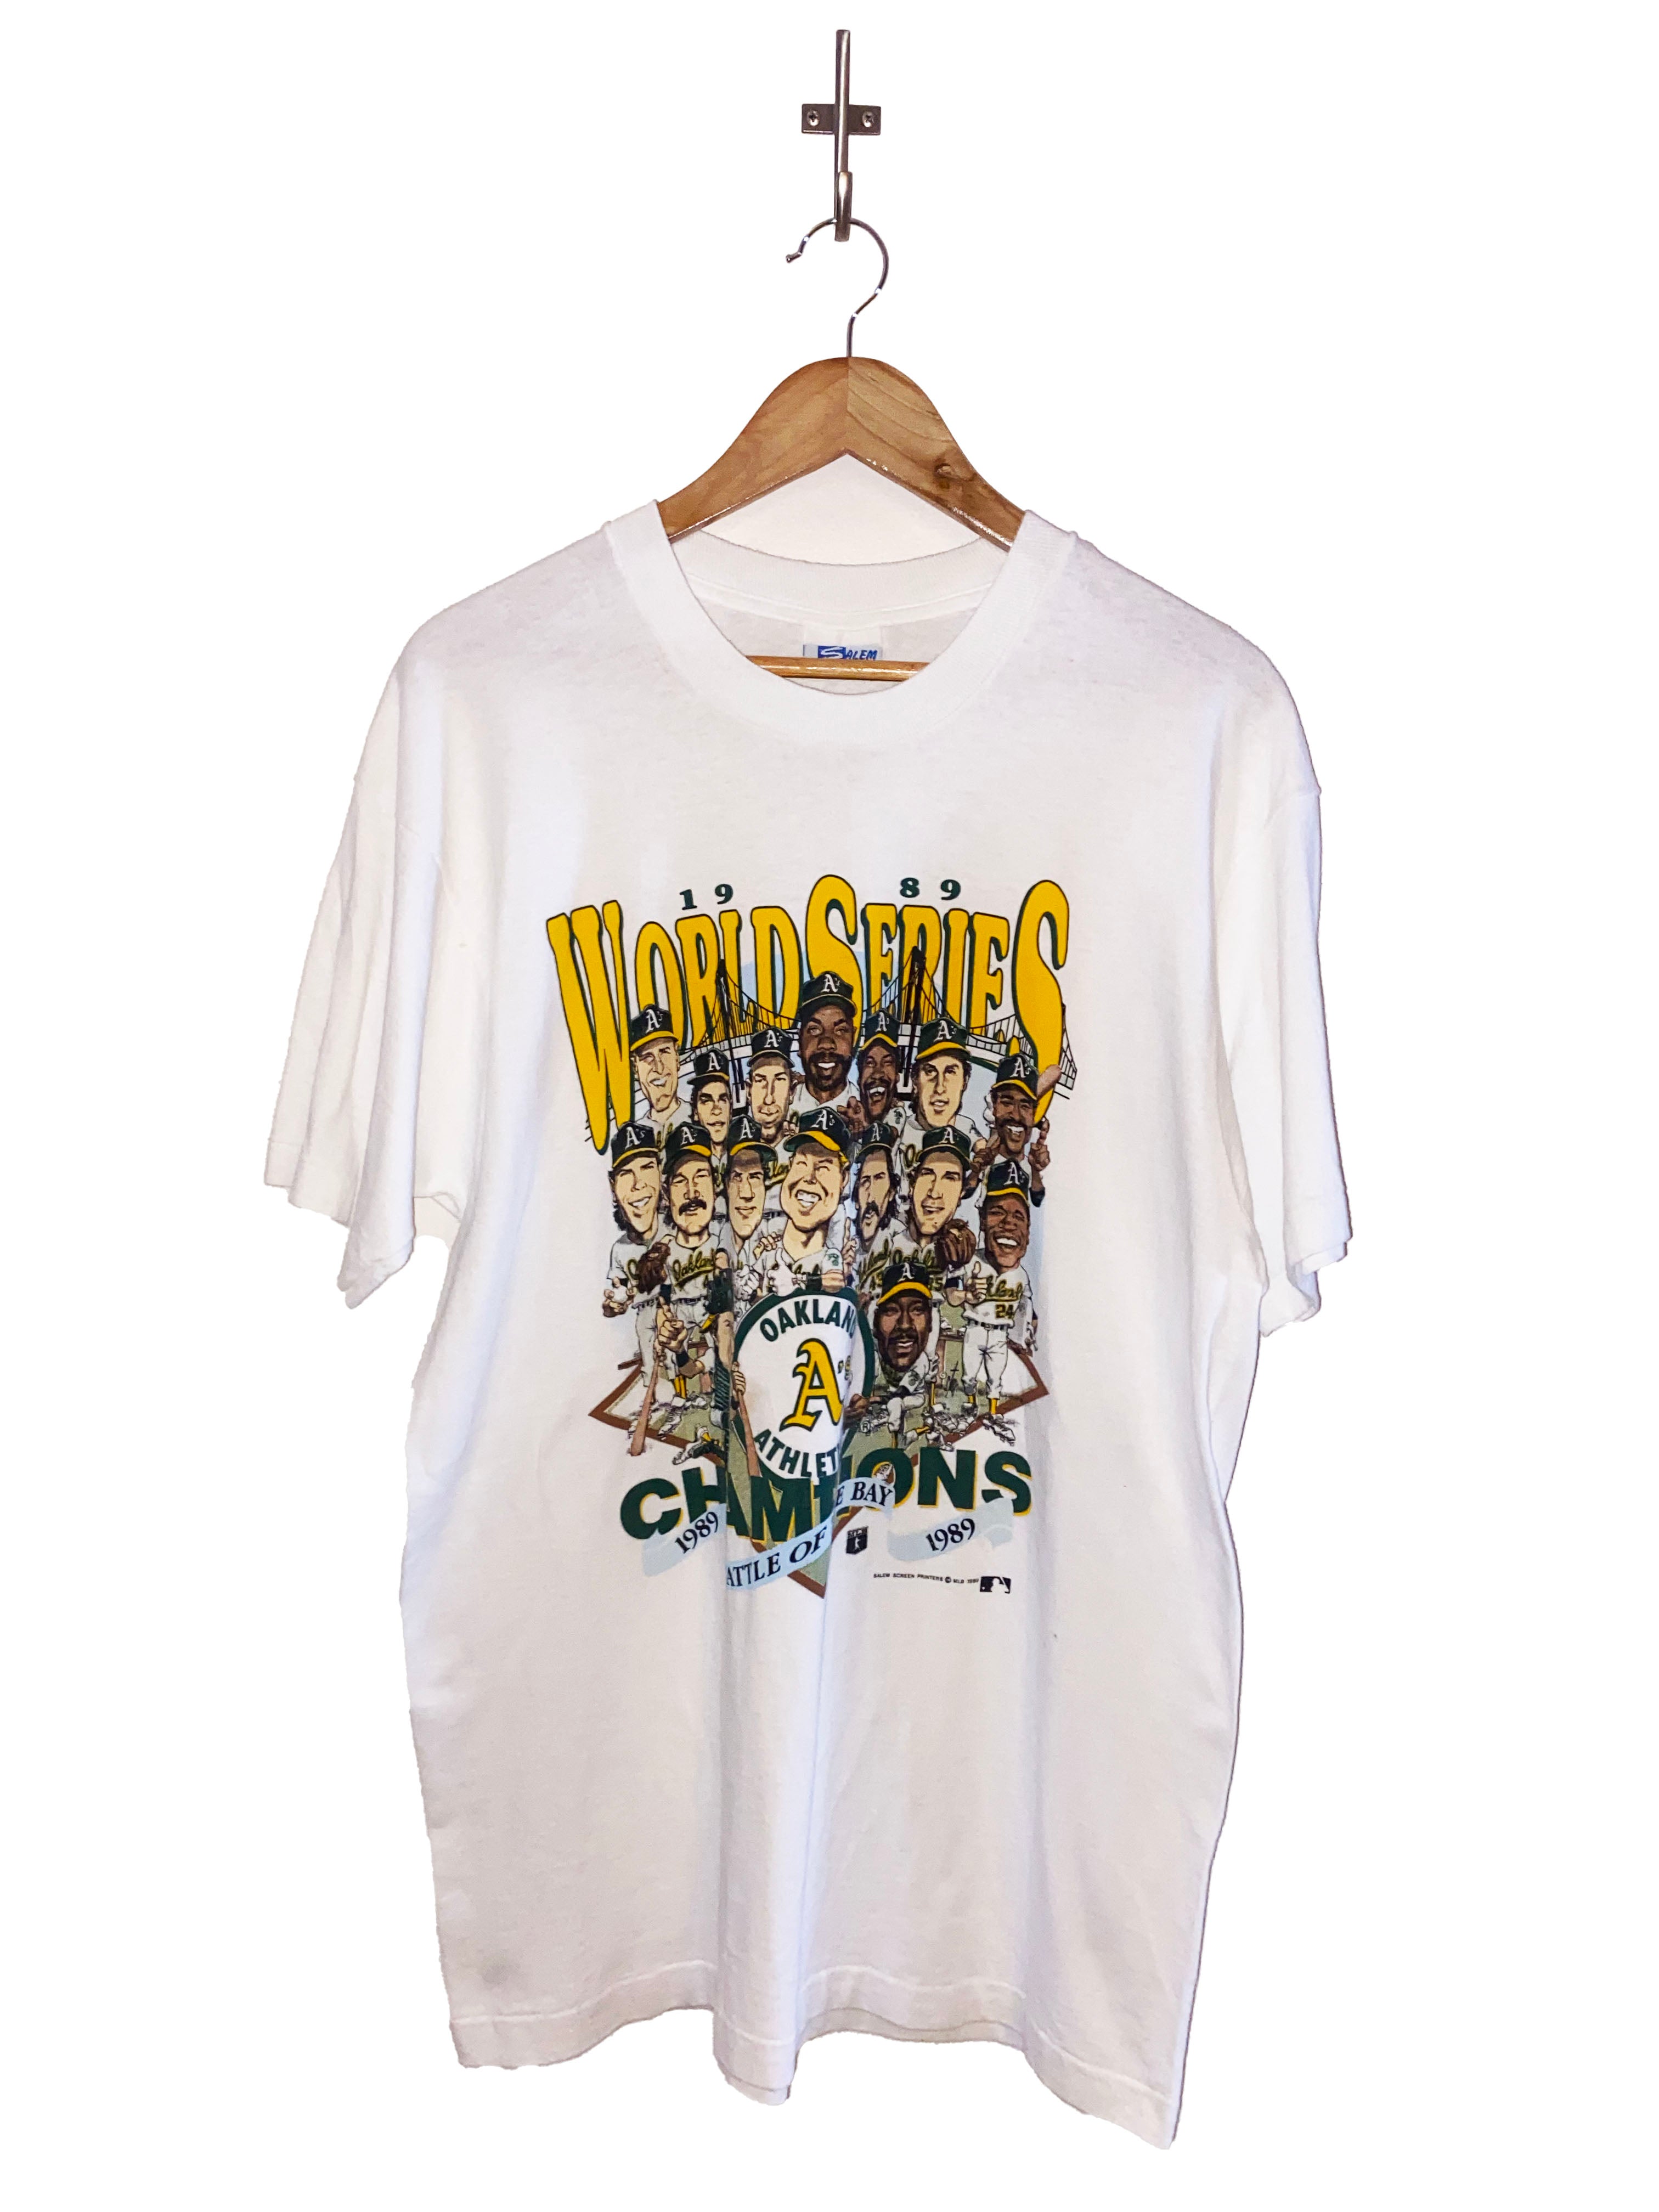 SearchnRescueVintage 1989 American League Champions Graphic T Shirt//OAKLAND A's Athletics//World Series//Vintage Baseball Tee//Fall Classics//Hipster Fashion